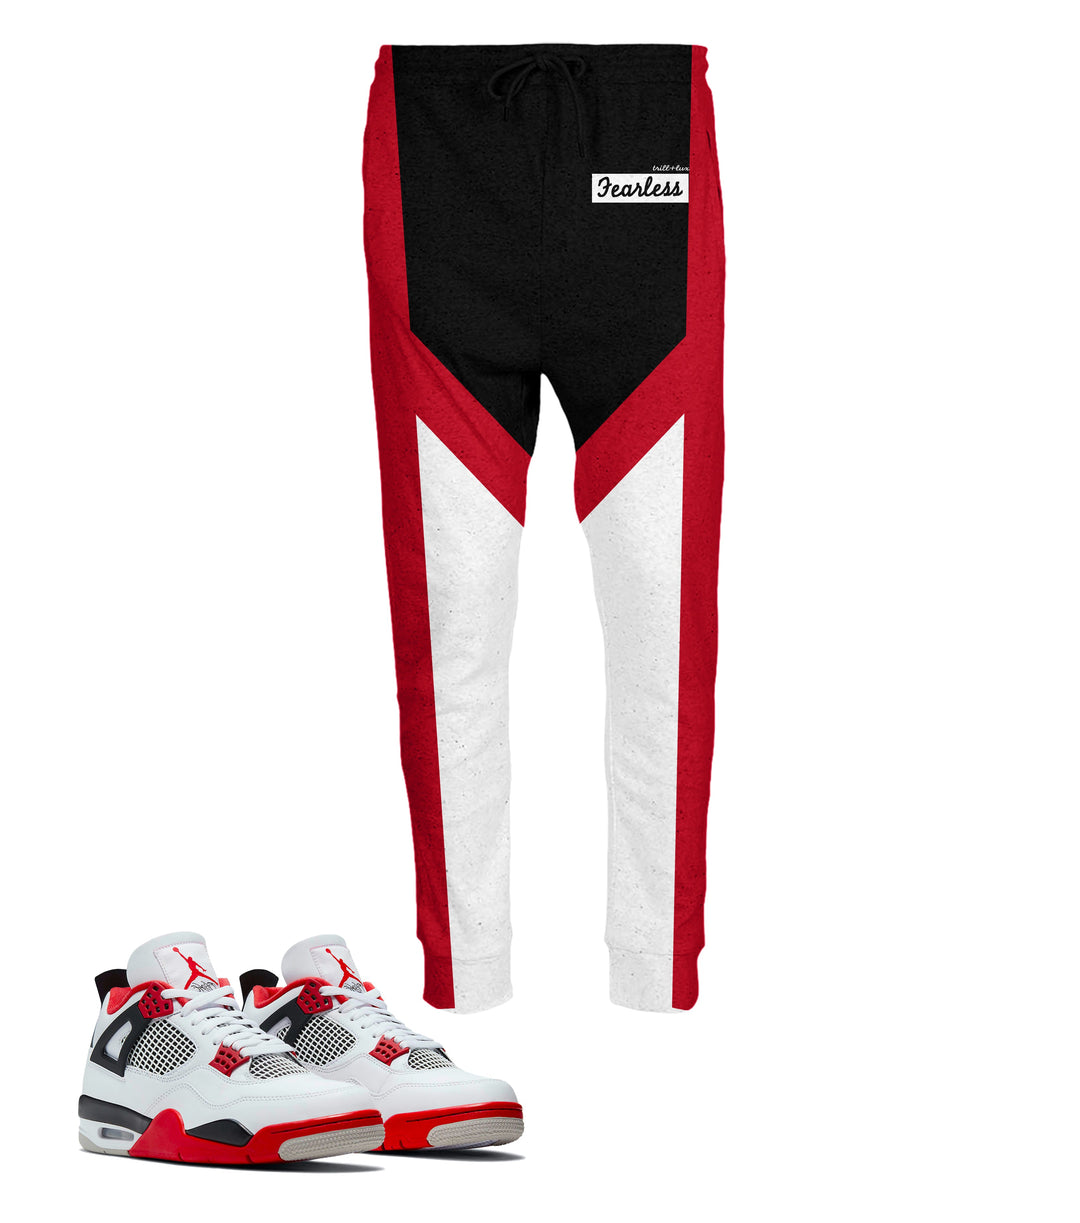 CLEARANCE - Fearless | Retro Jordan 4 Fire Red Inspired Jogger